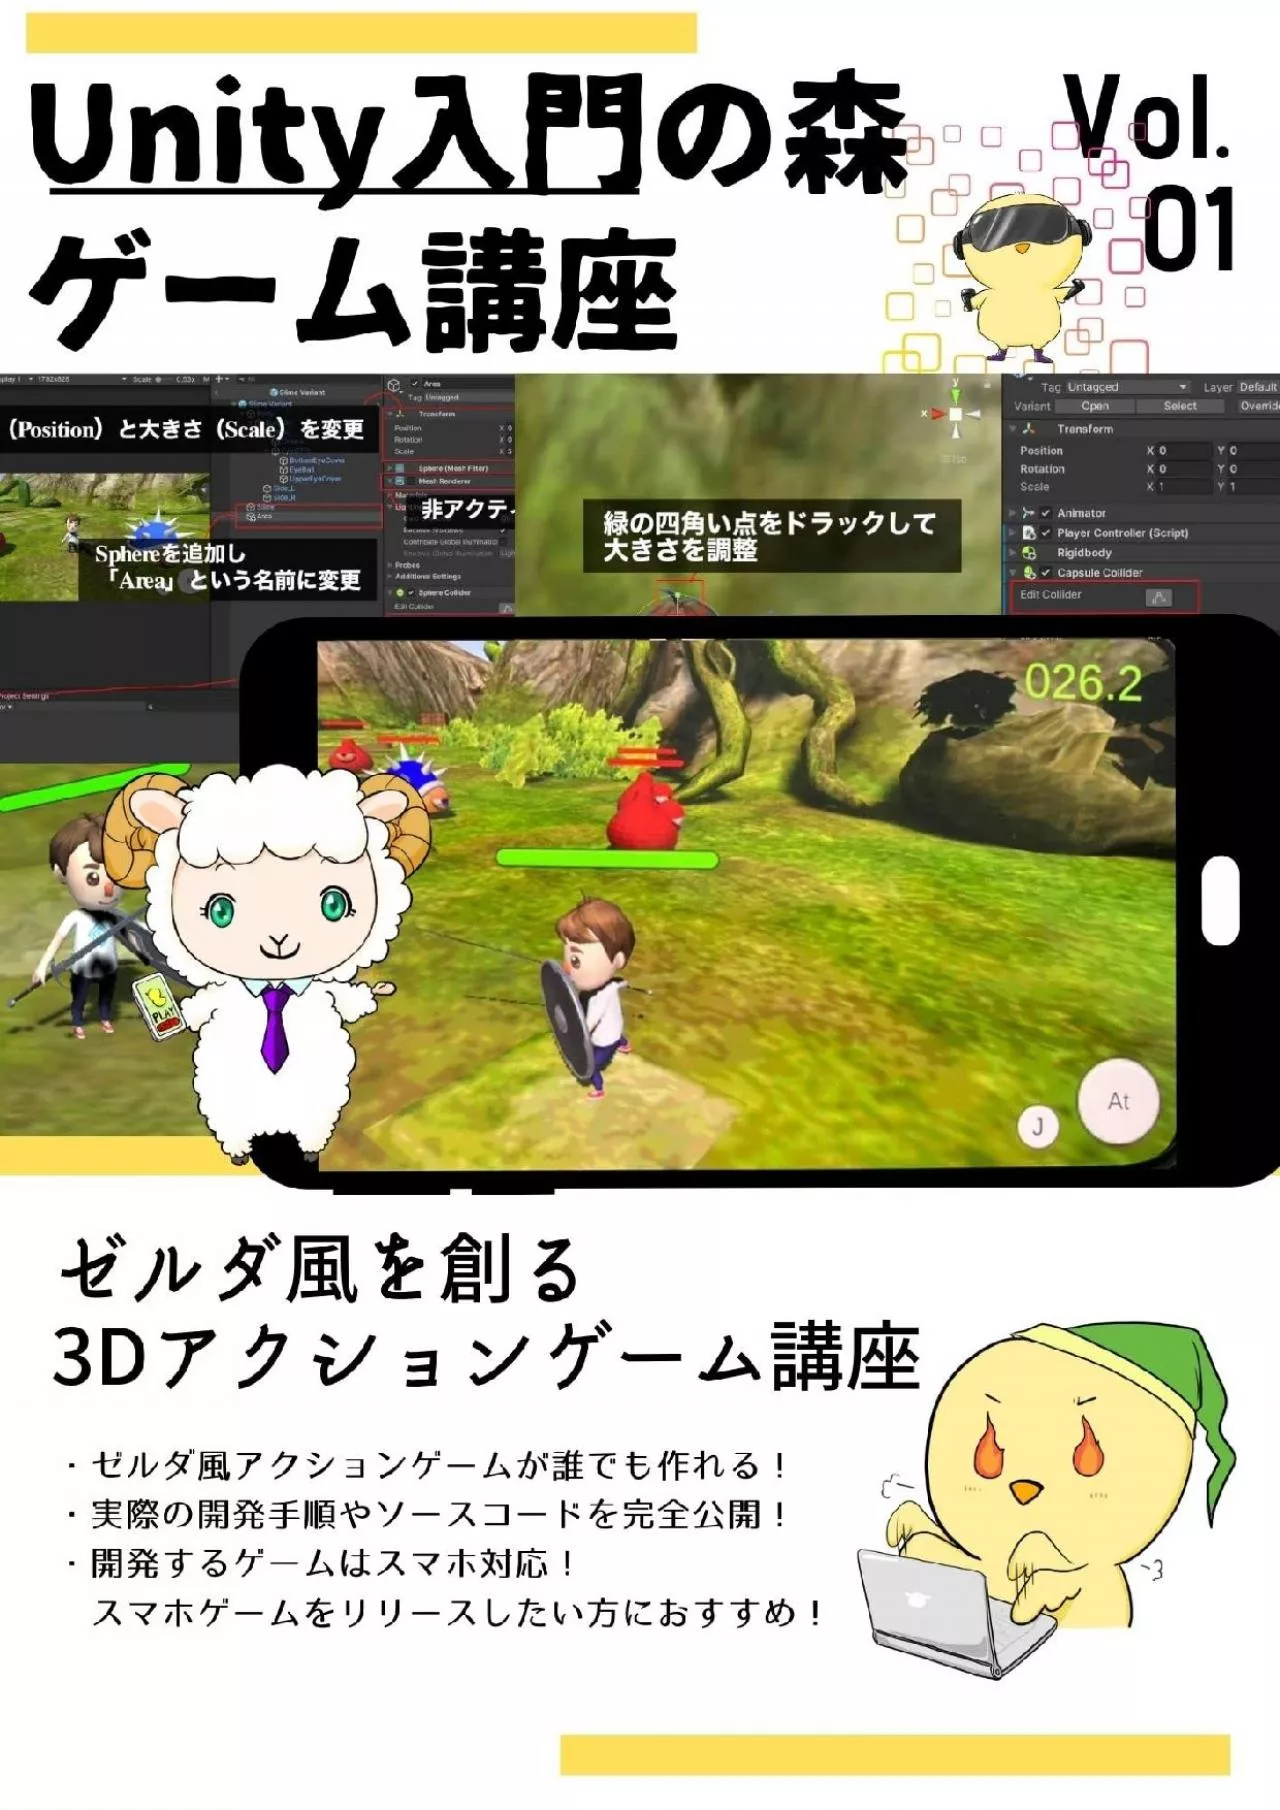 [PDF]-How to Make Unity 3D Action Games Zelda Genshin and Monster Hunter Style for smartphones